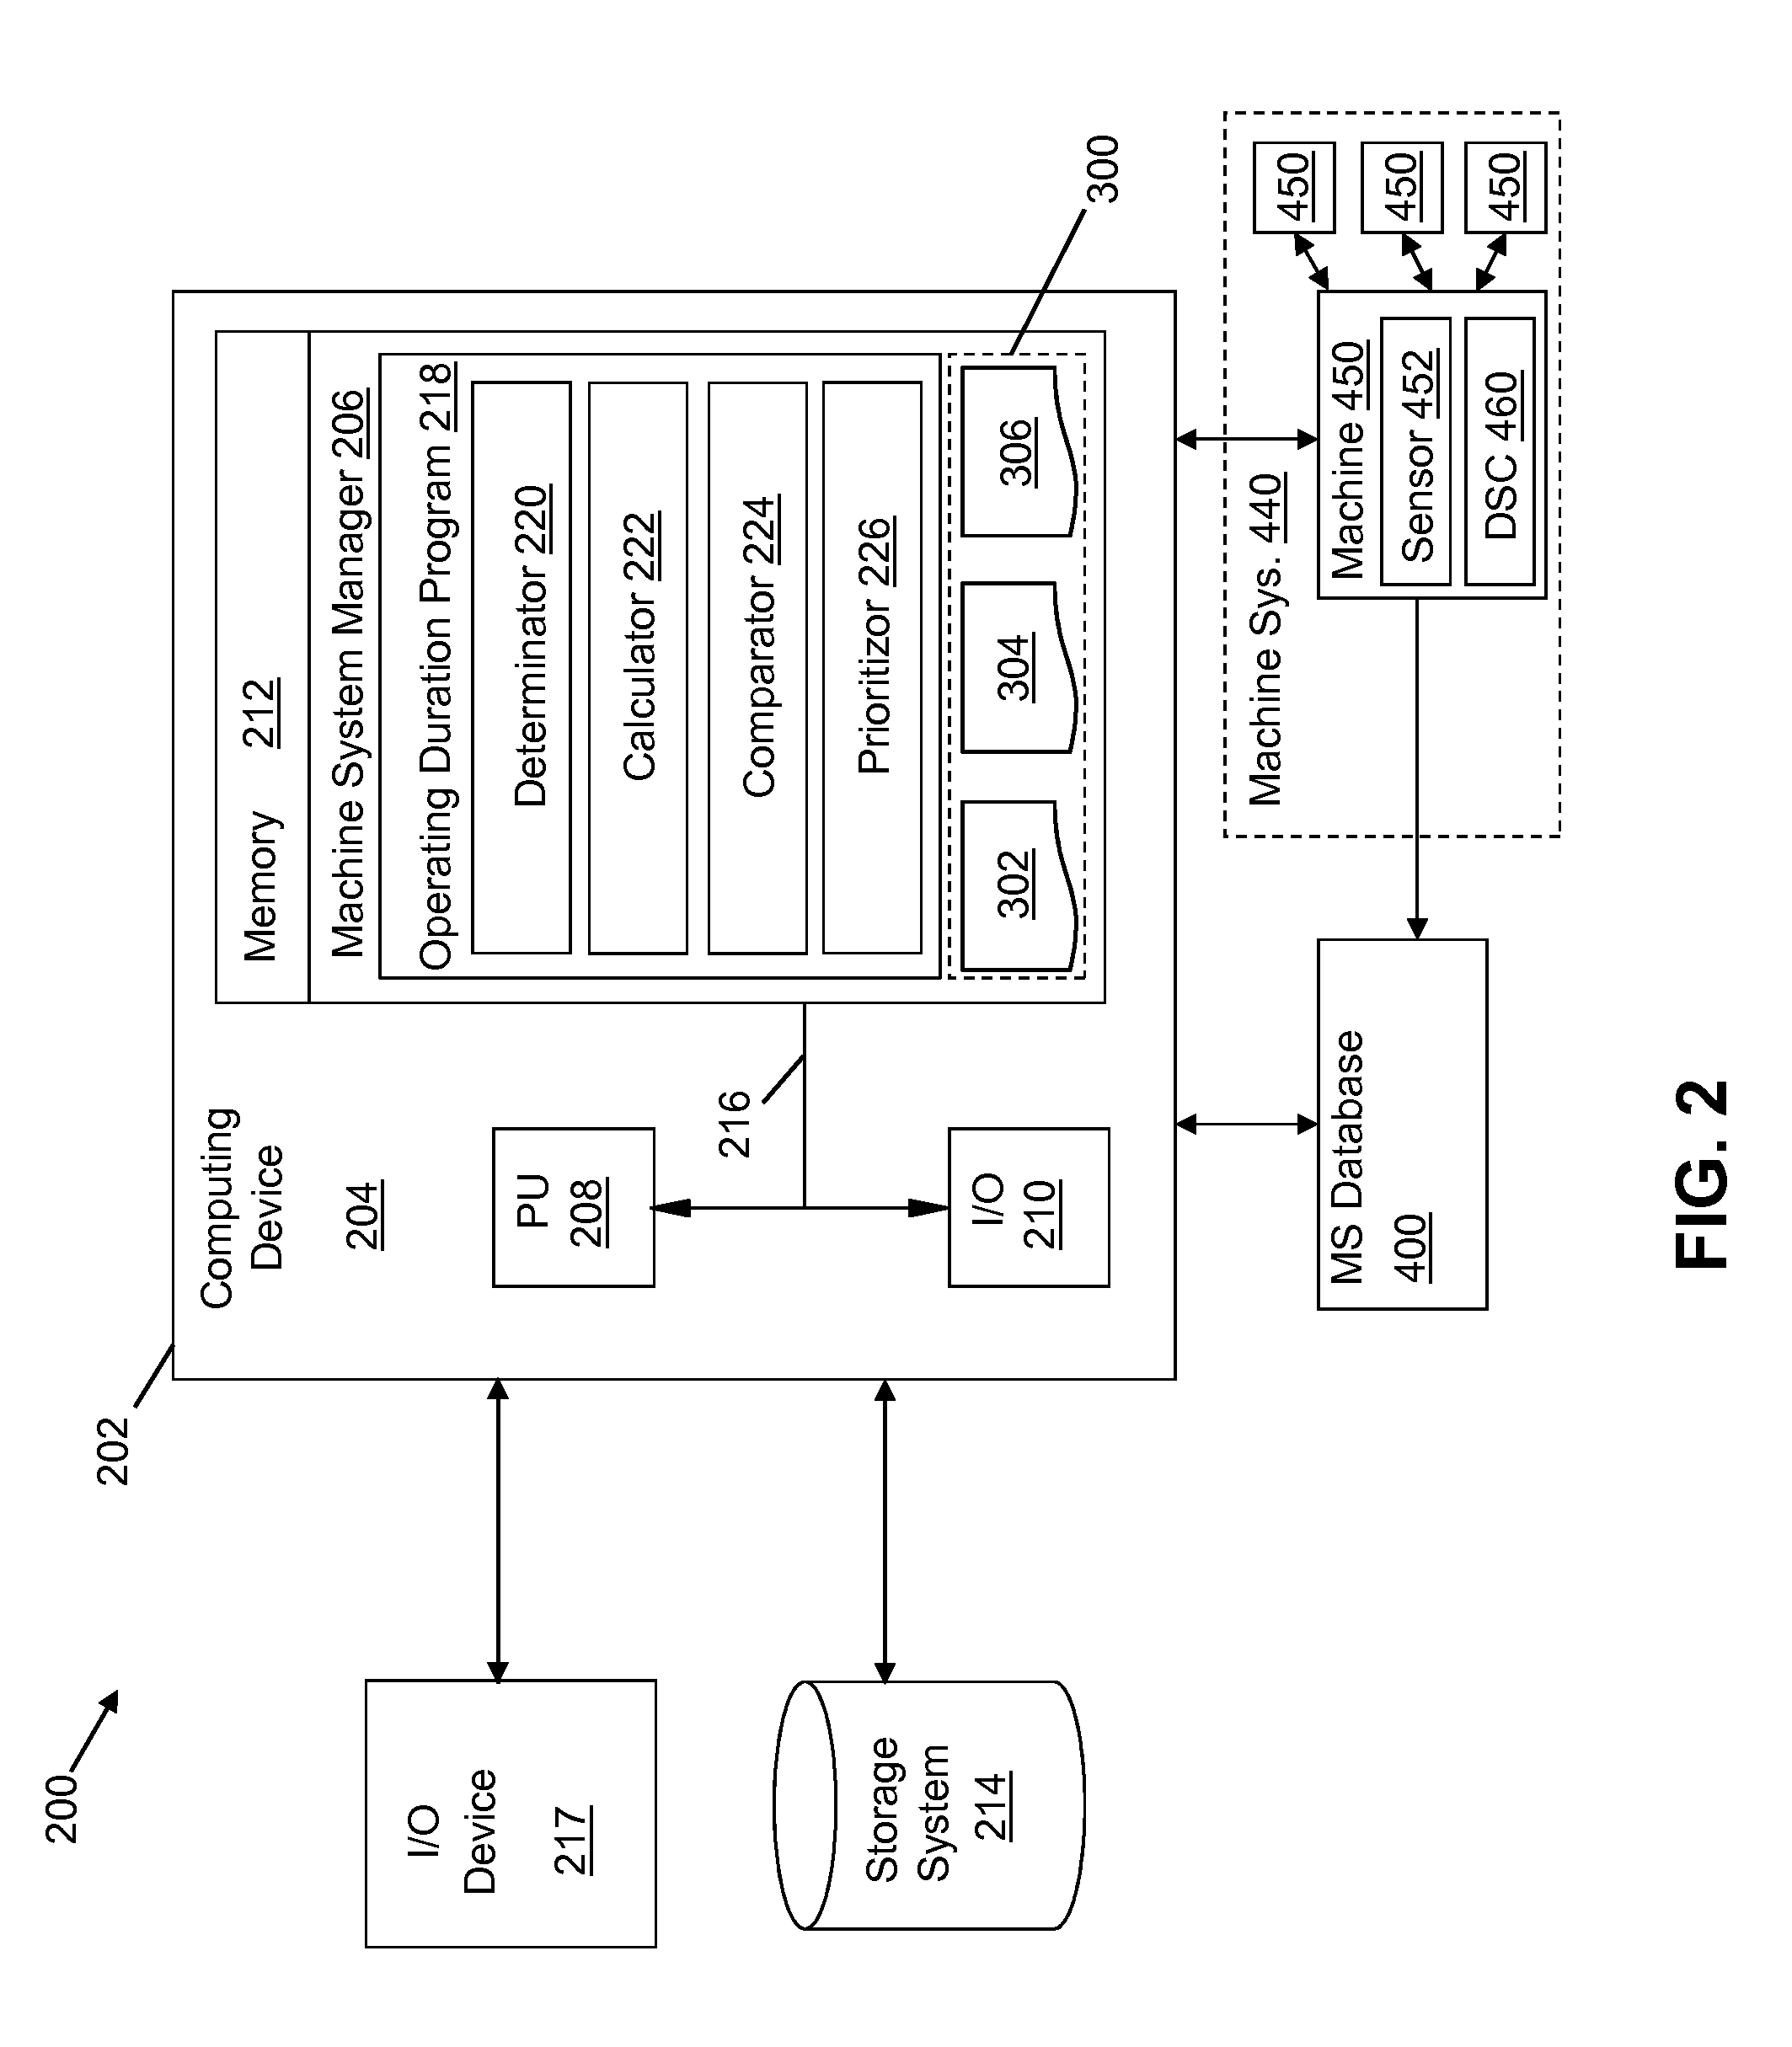 System and method for evaluating opportunities to extend operating durations